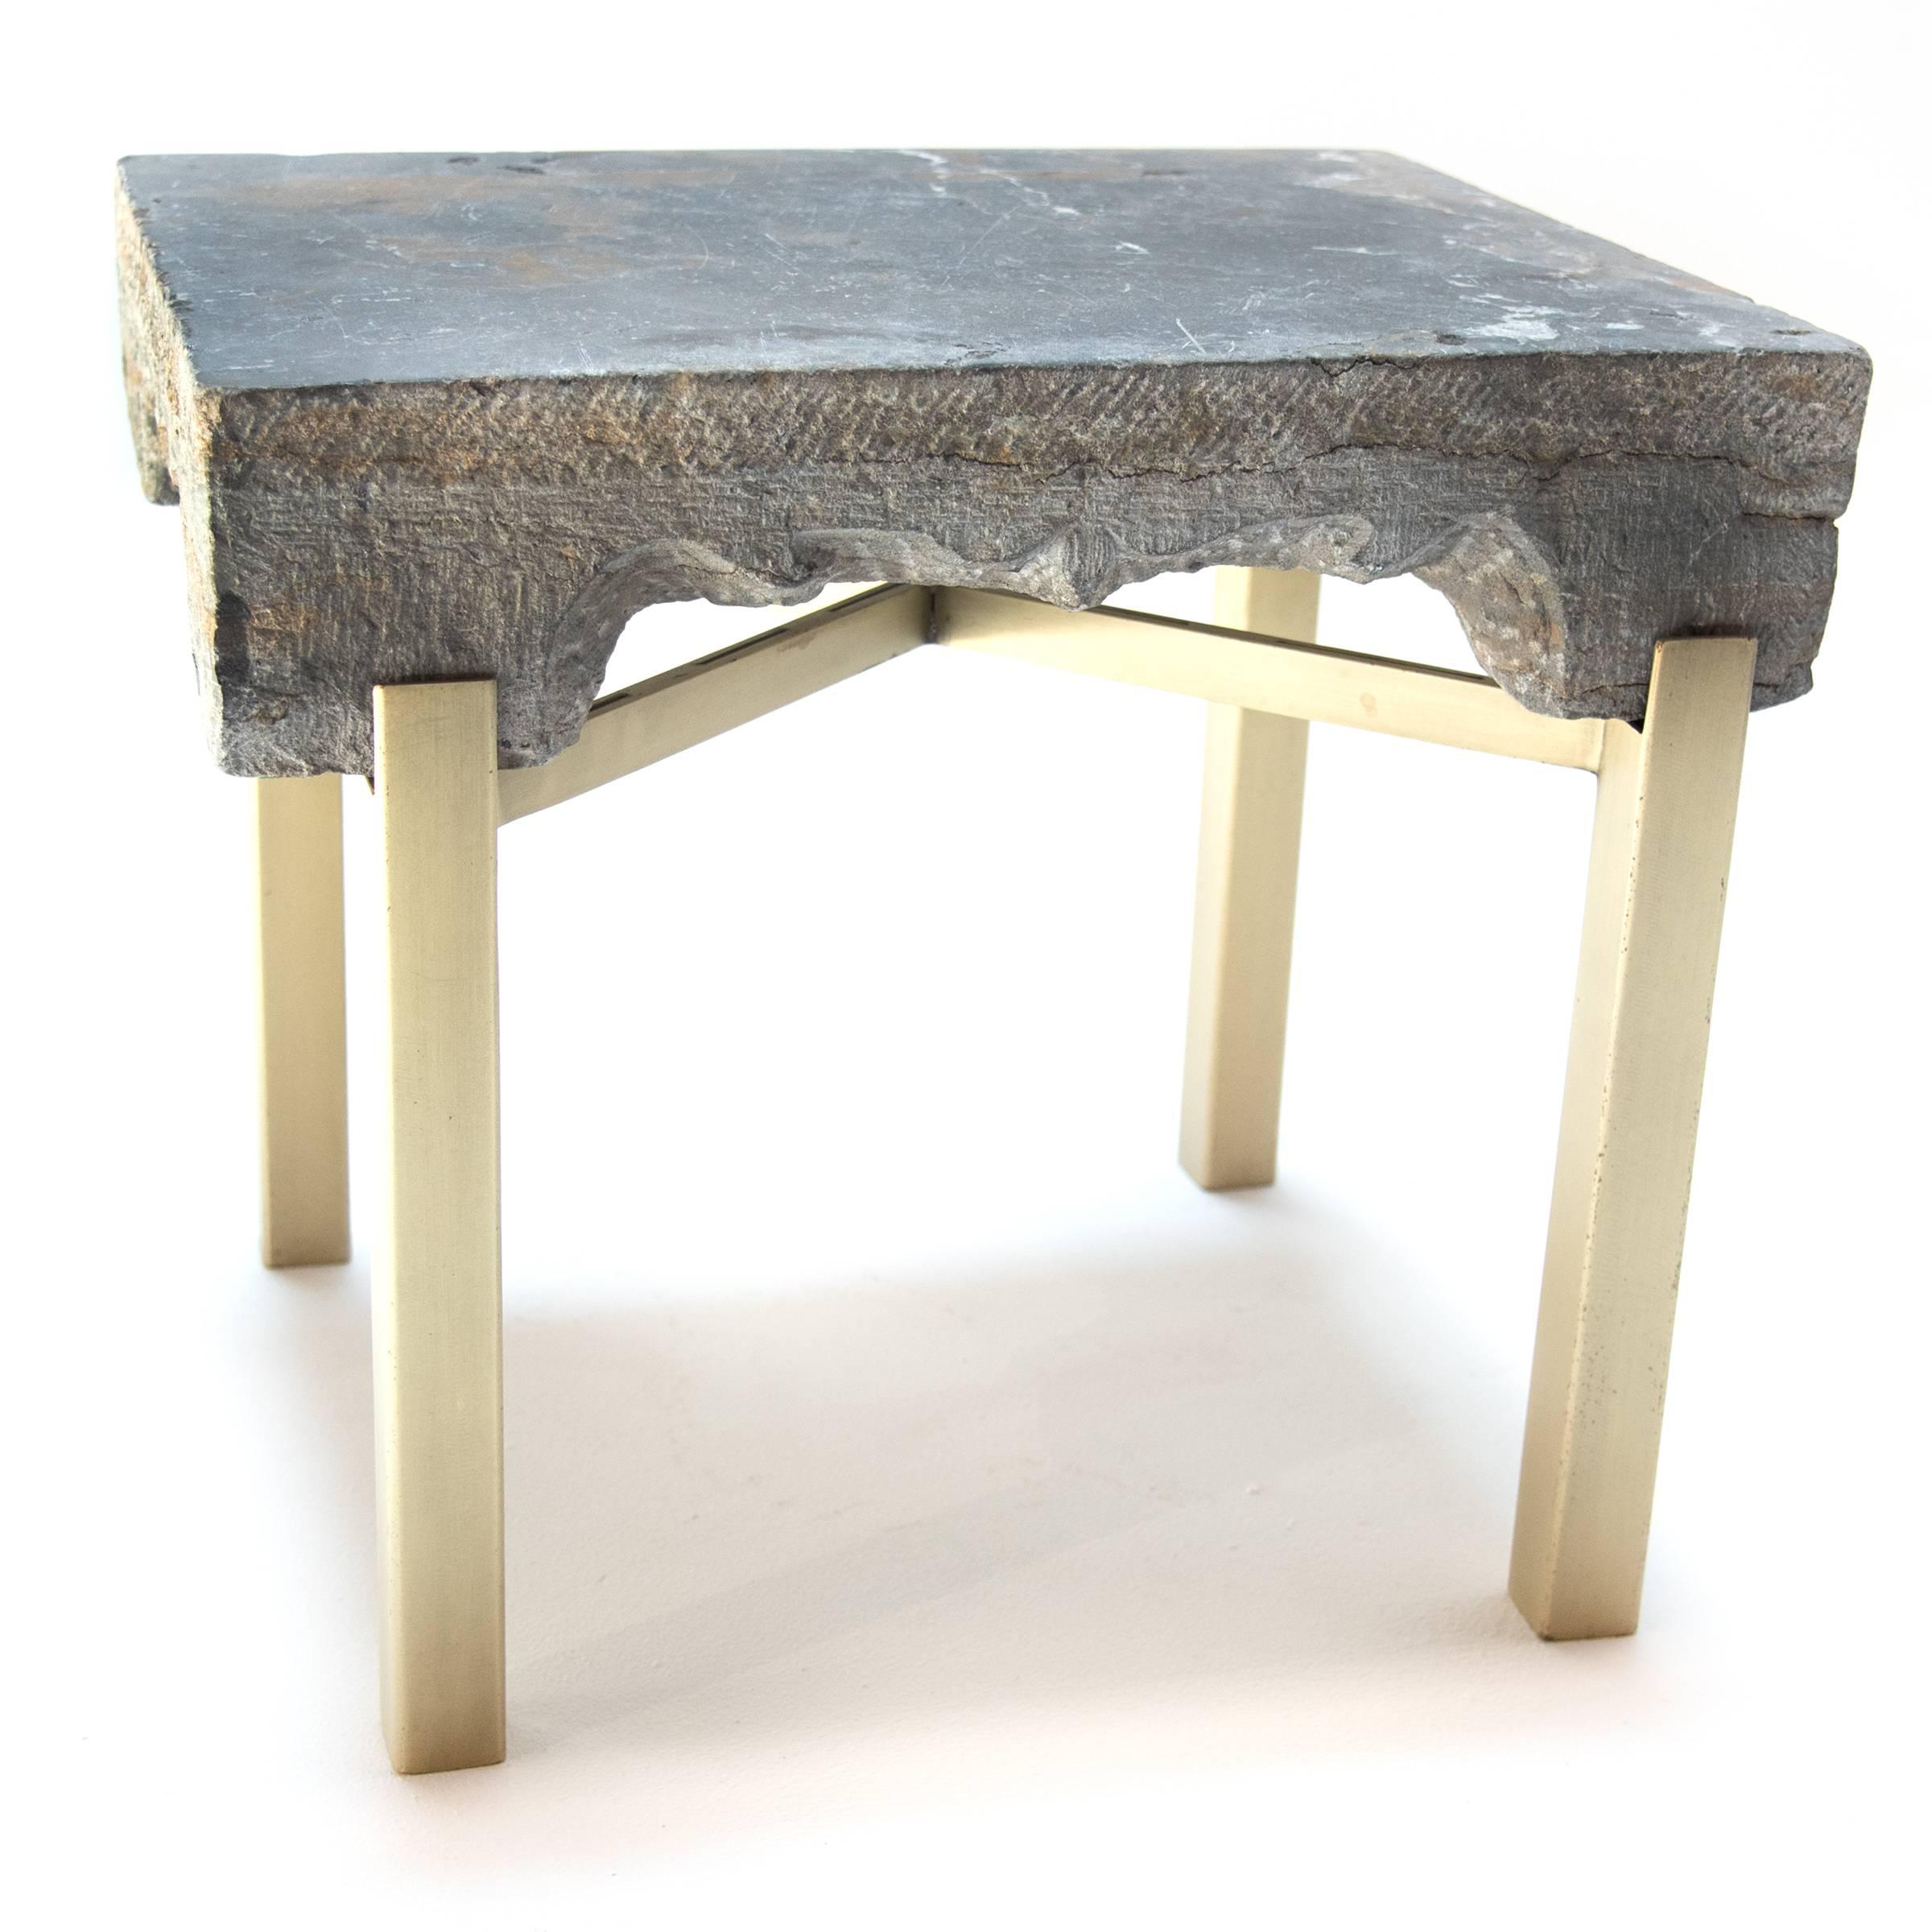 Early 19th century Chinese hand-carved limestone stand with brass-plated iron legs.